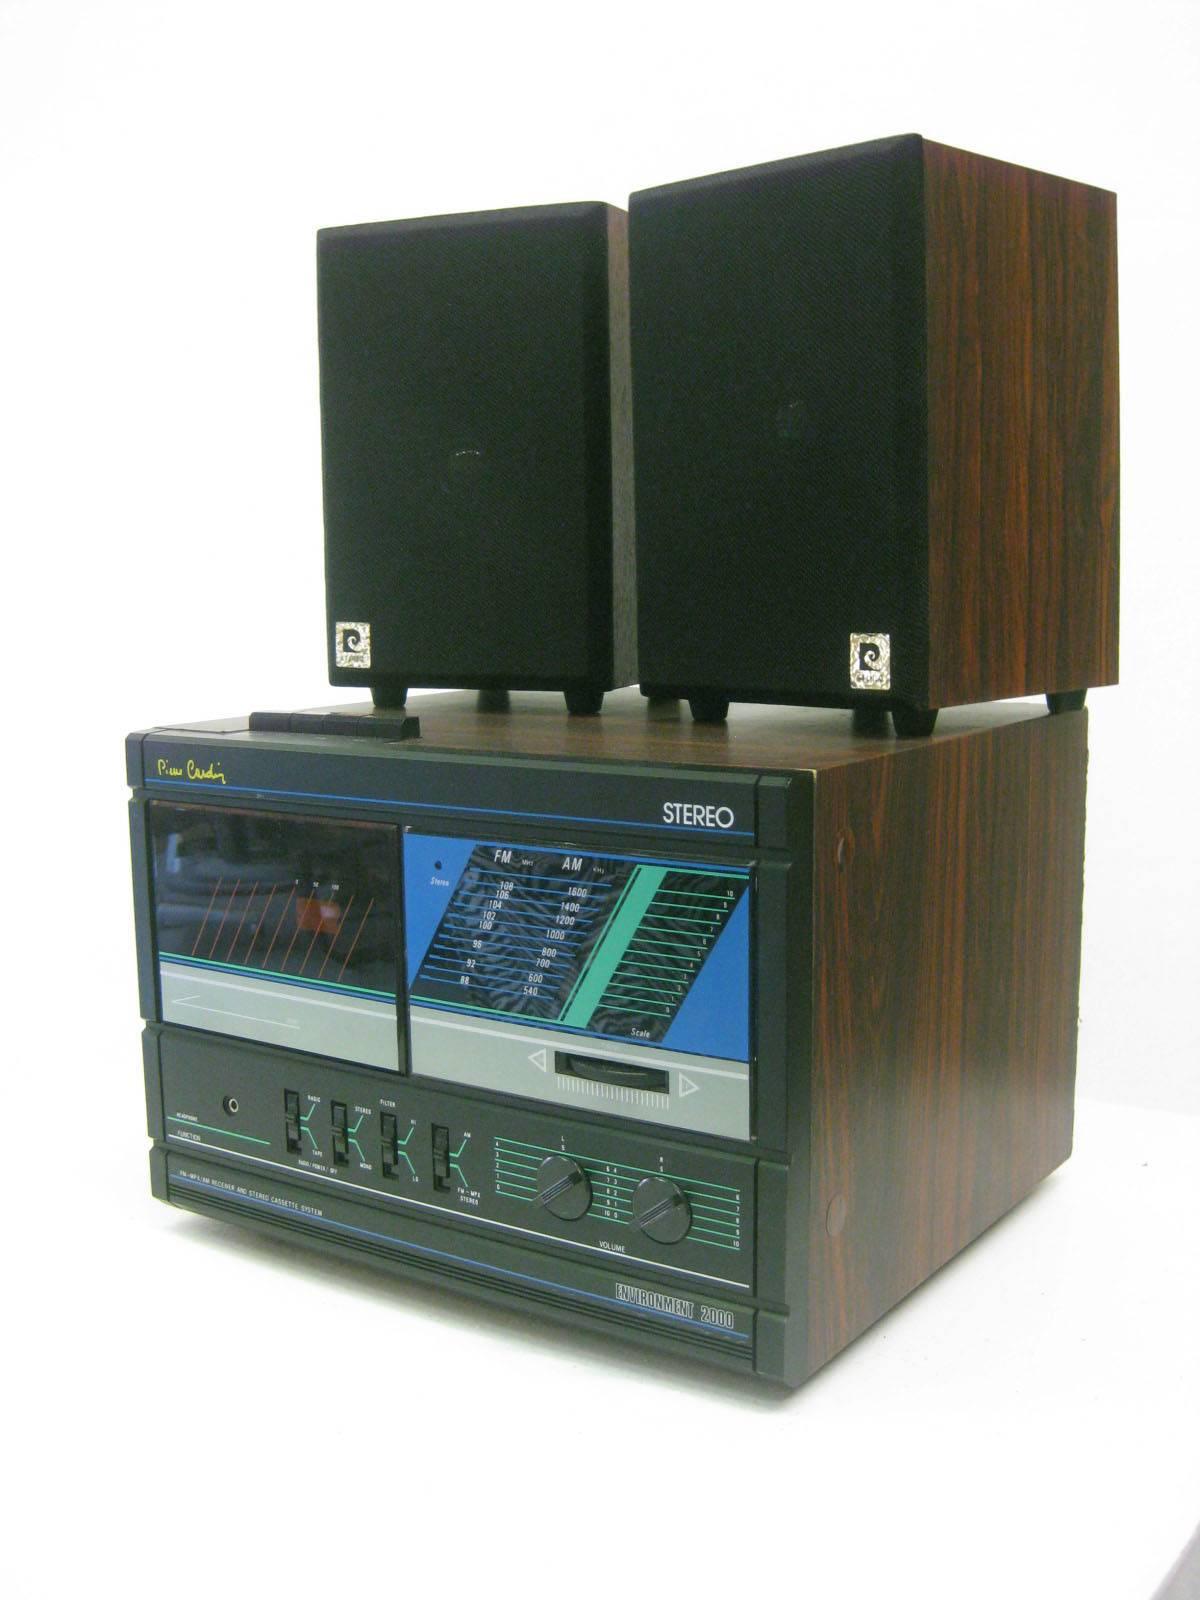 Stereo with two detached speakers by Pierre Cardin. AM/FM and Cassette. Dark wood case and very 1980s design. Speakers are 5.5 W x 6 D x 8.5 H individually.